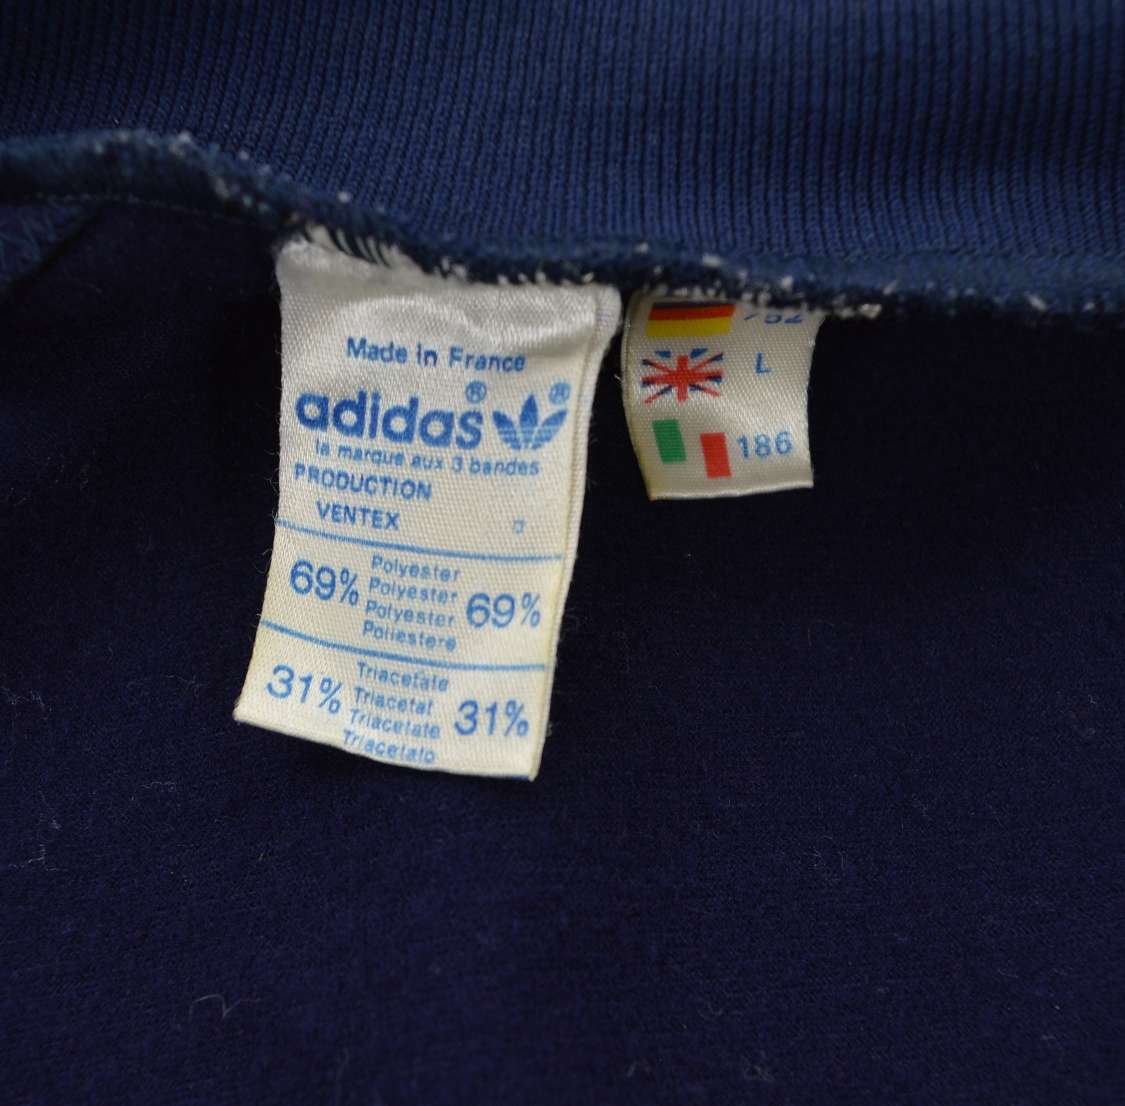 ADIDAS OLDSCHOOL TOP M Other \ Vintage | Classic-Shirts.com